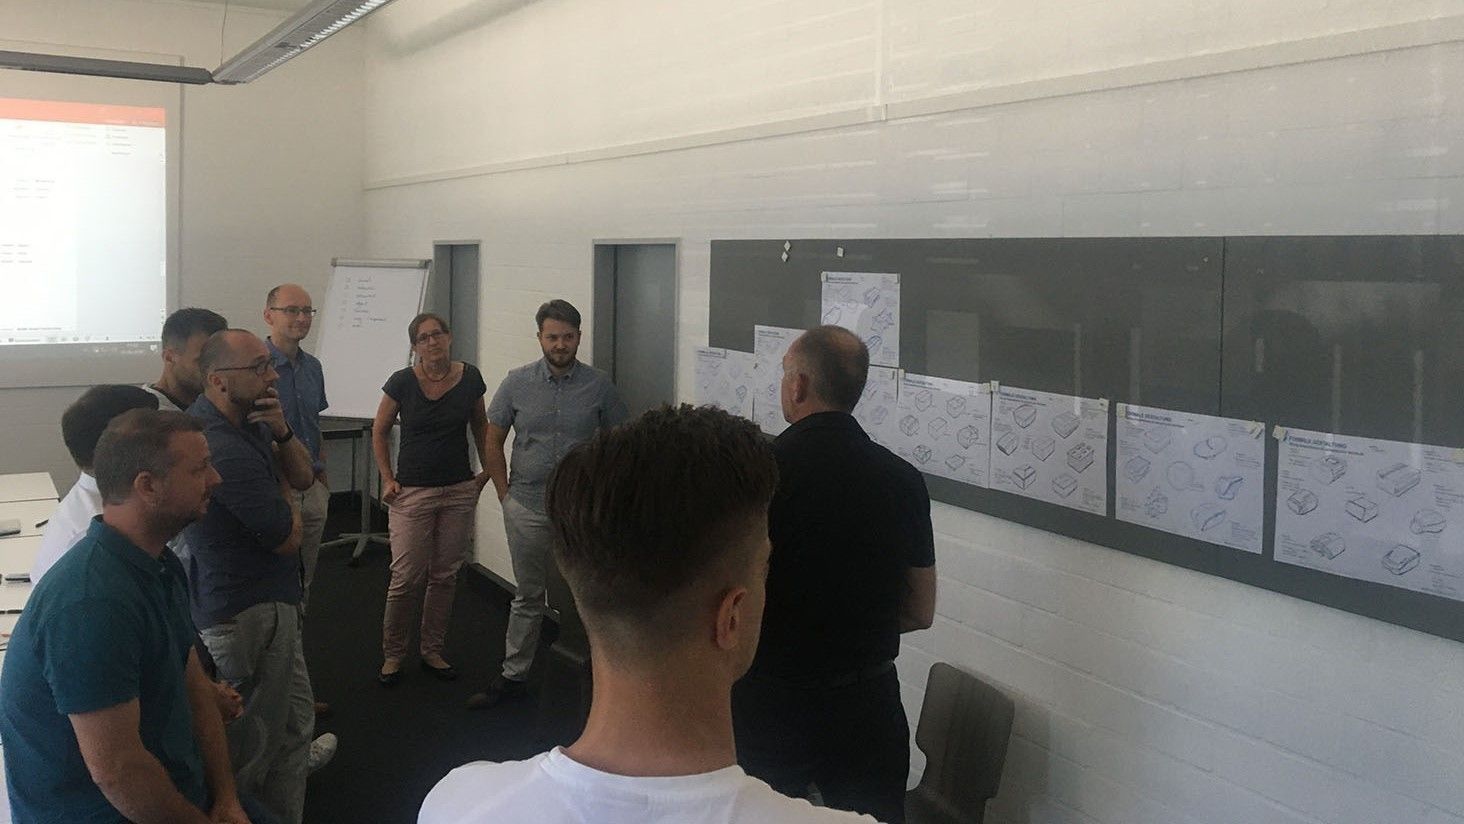 The team looks at posters